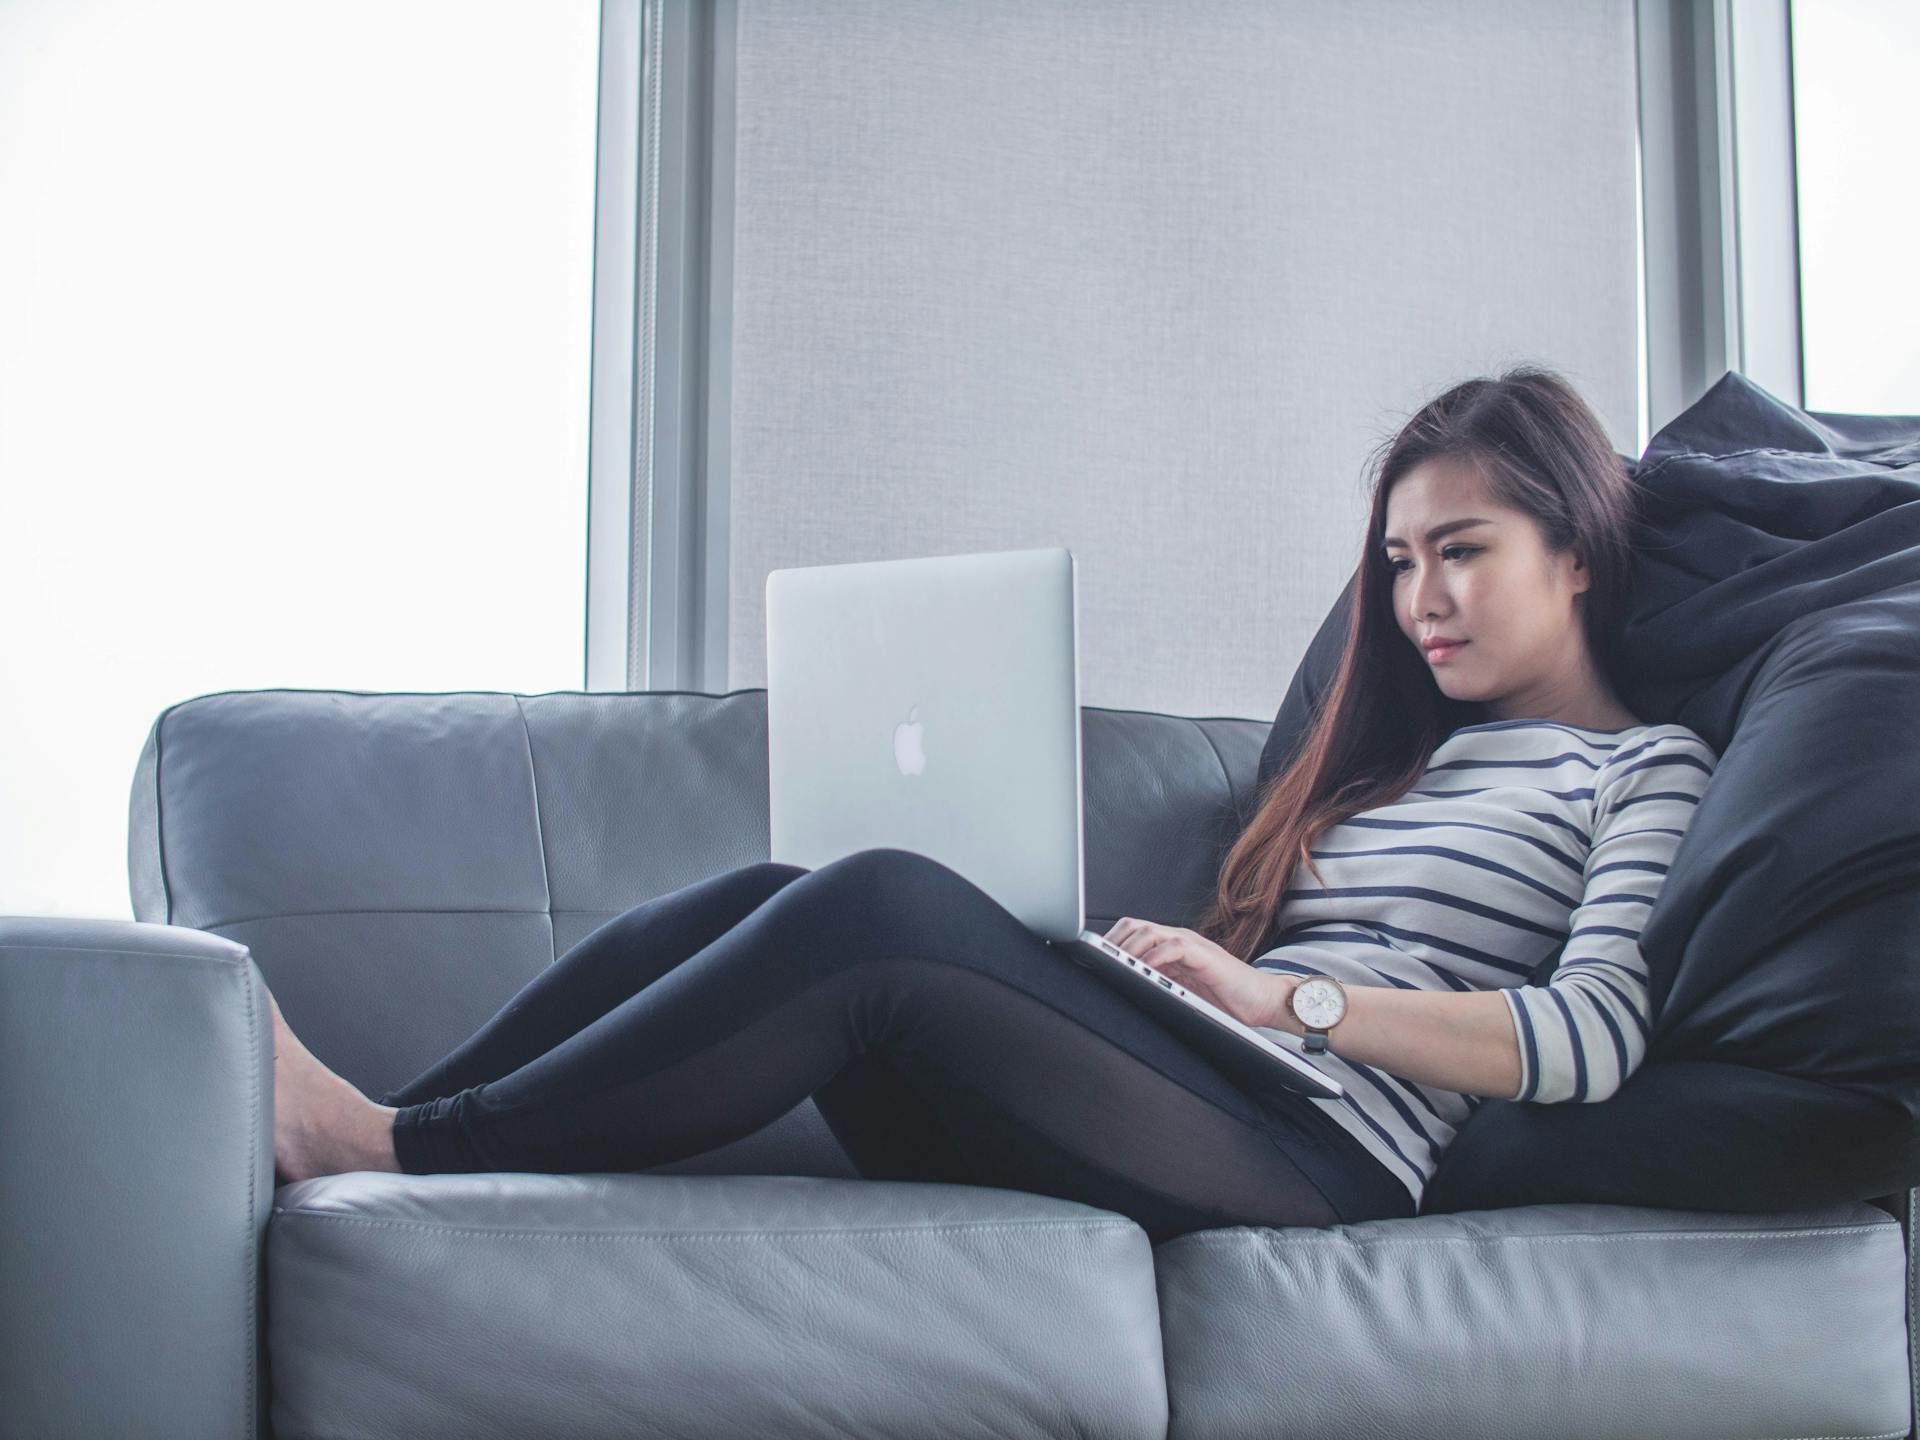 Women sat on a couch happily using her computer